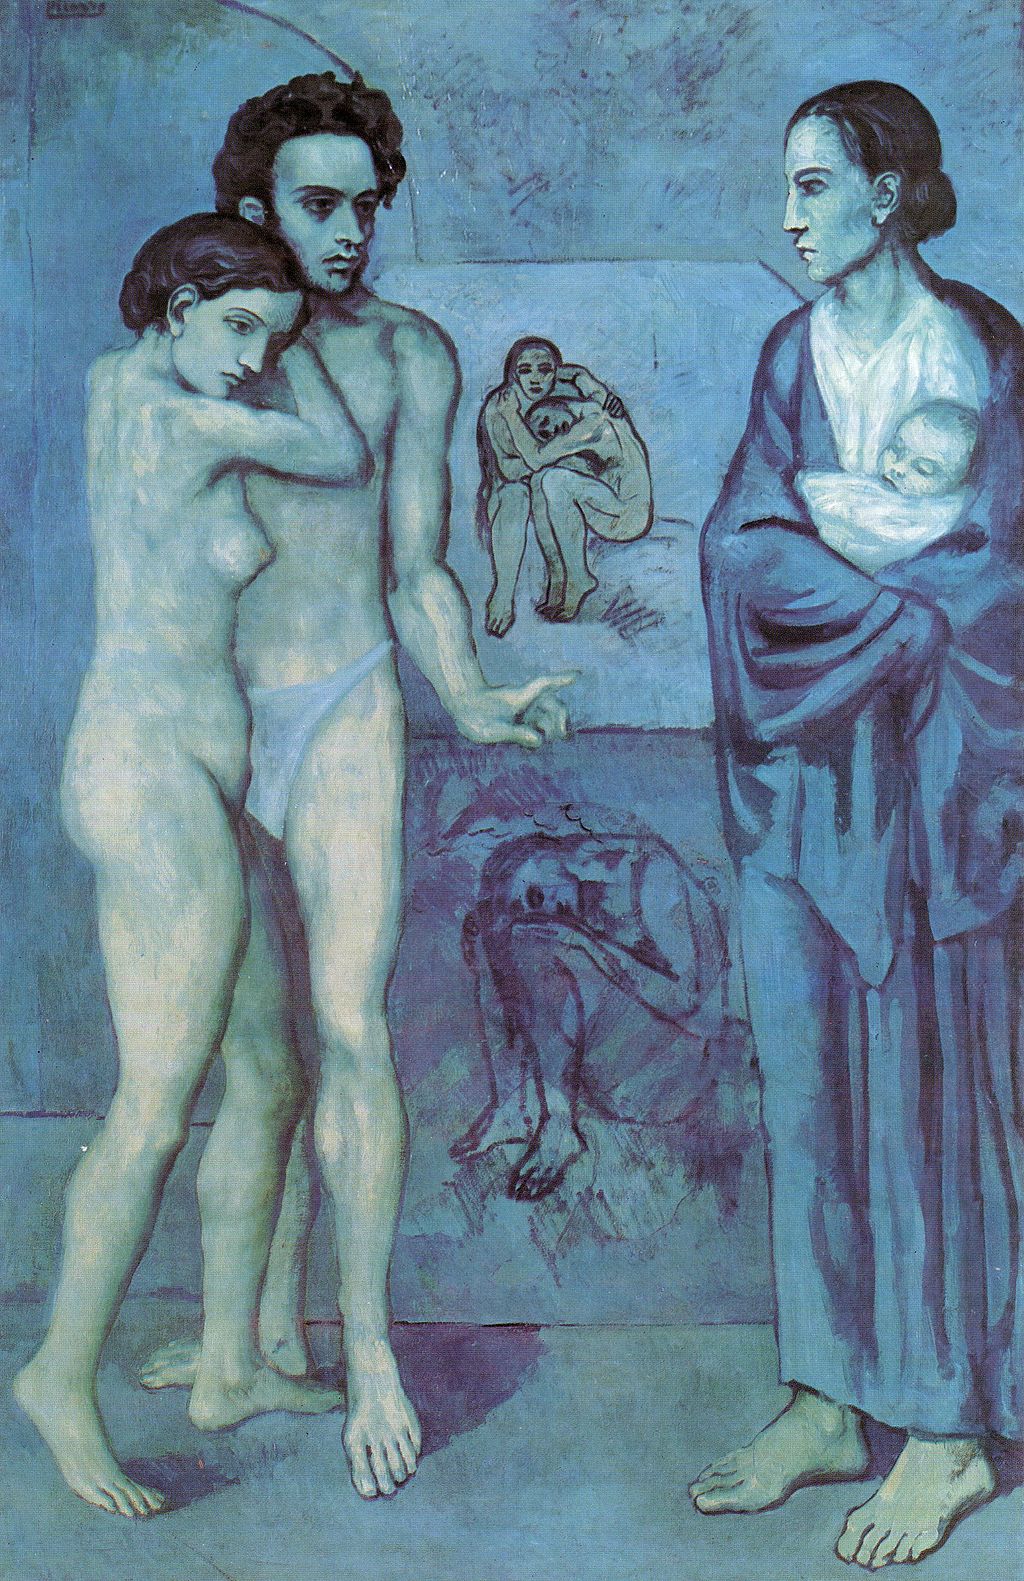 blue in art, Pablo Picasso, La Vie, 1903, Cleveland Museum of Art, Cleveland, OH, USA.